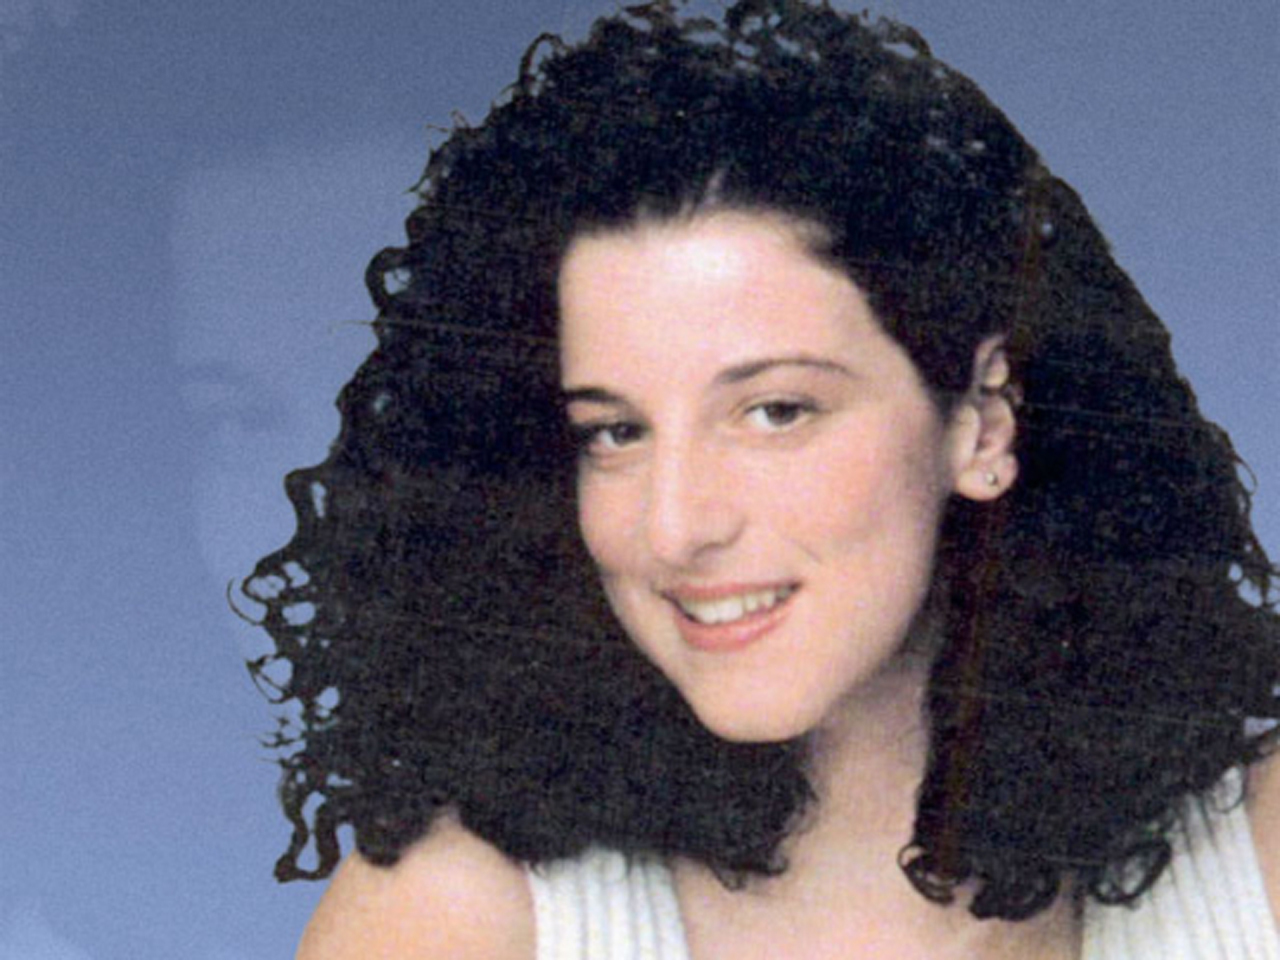 Chandra Levy Murder: Judge holds secret hearings on new information about  the credibility of a witness - CBS News